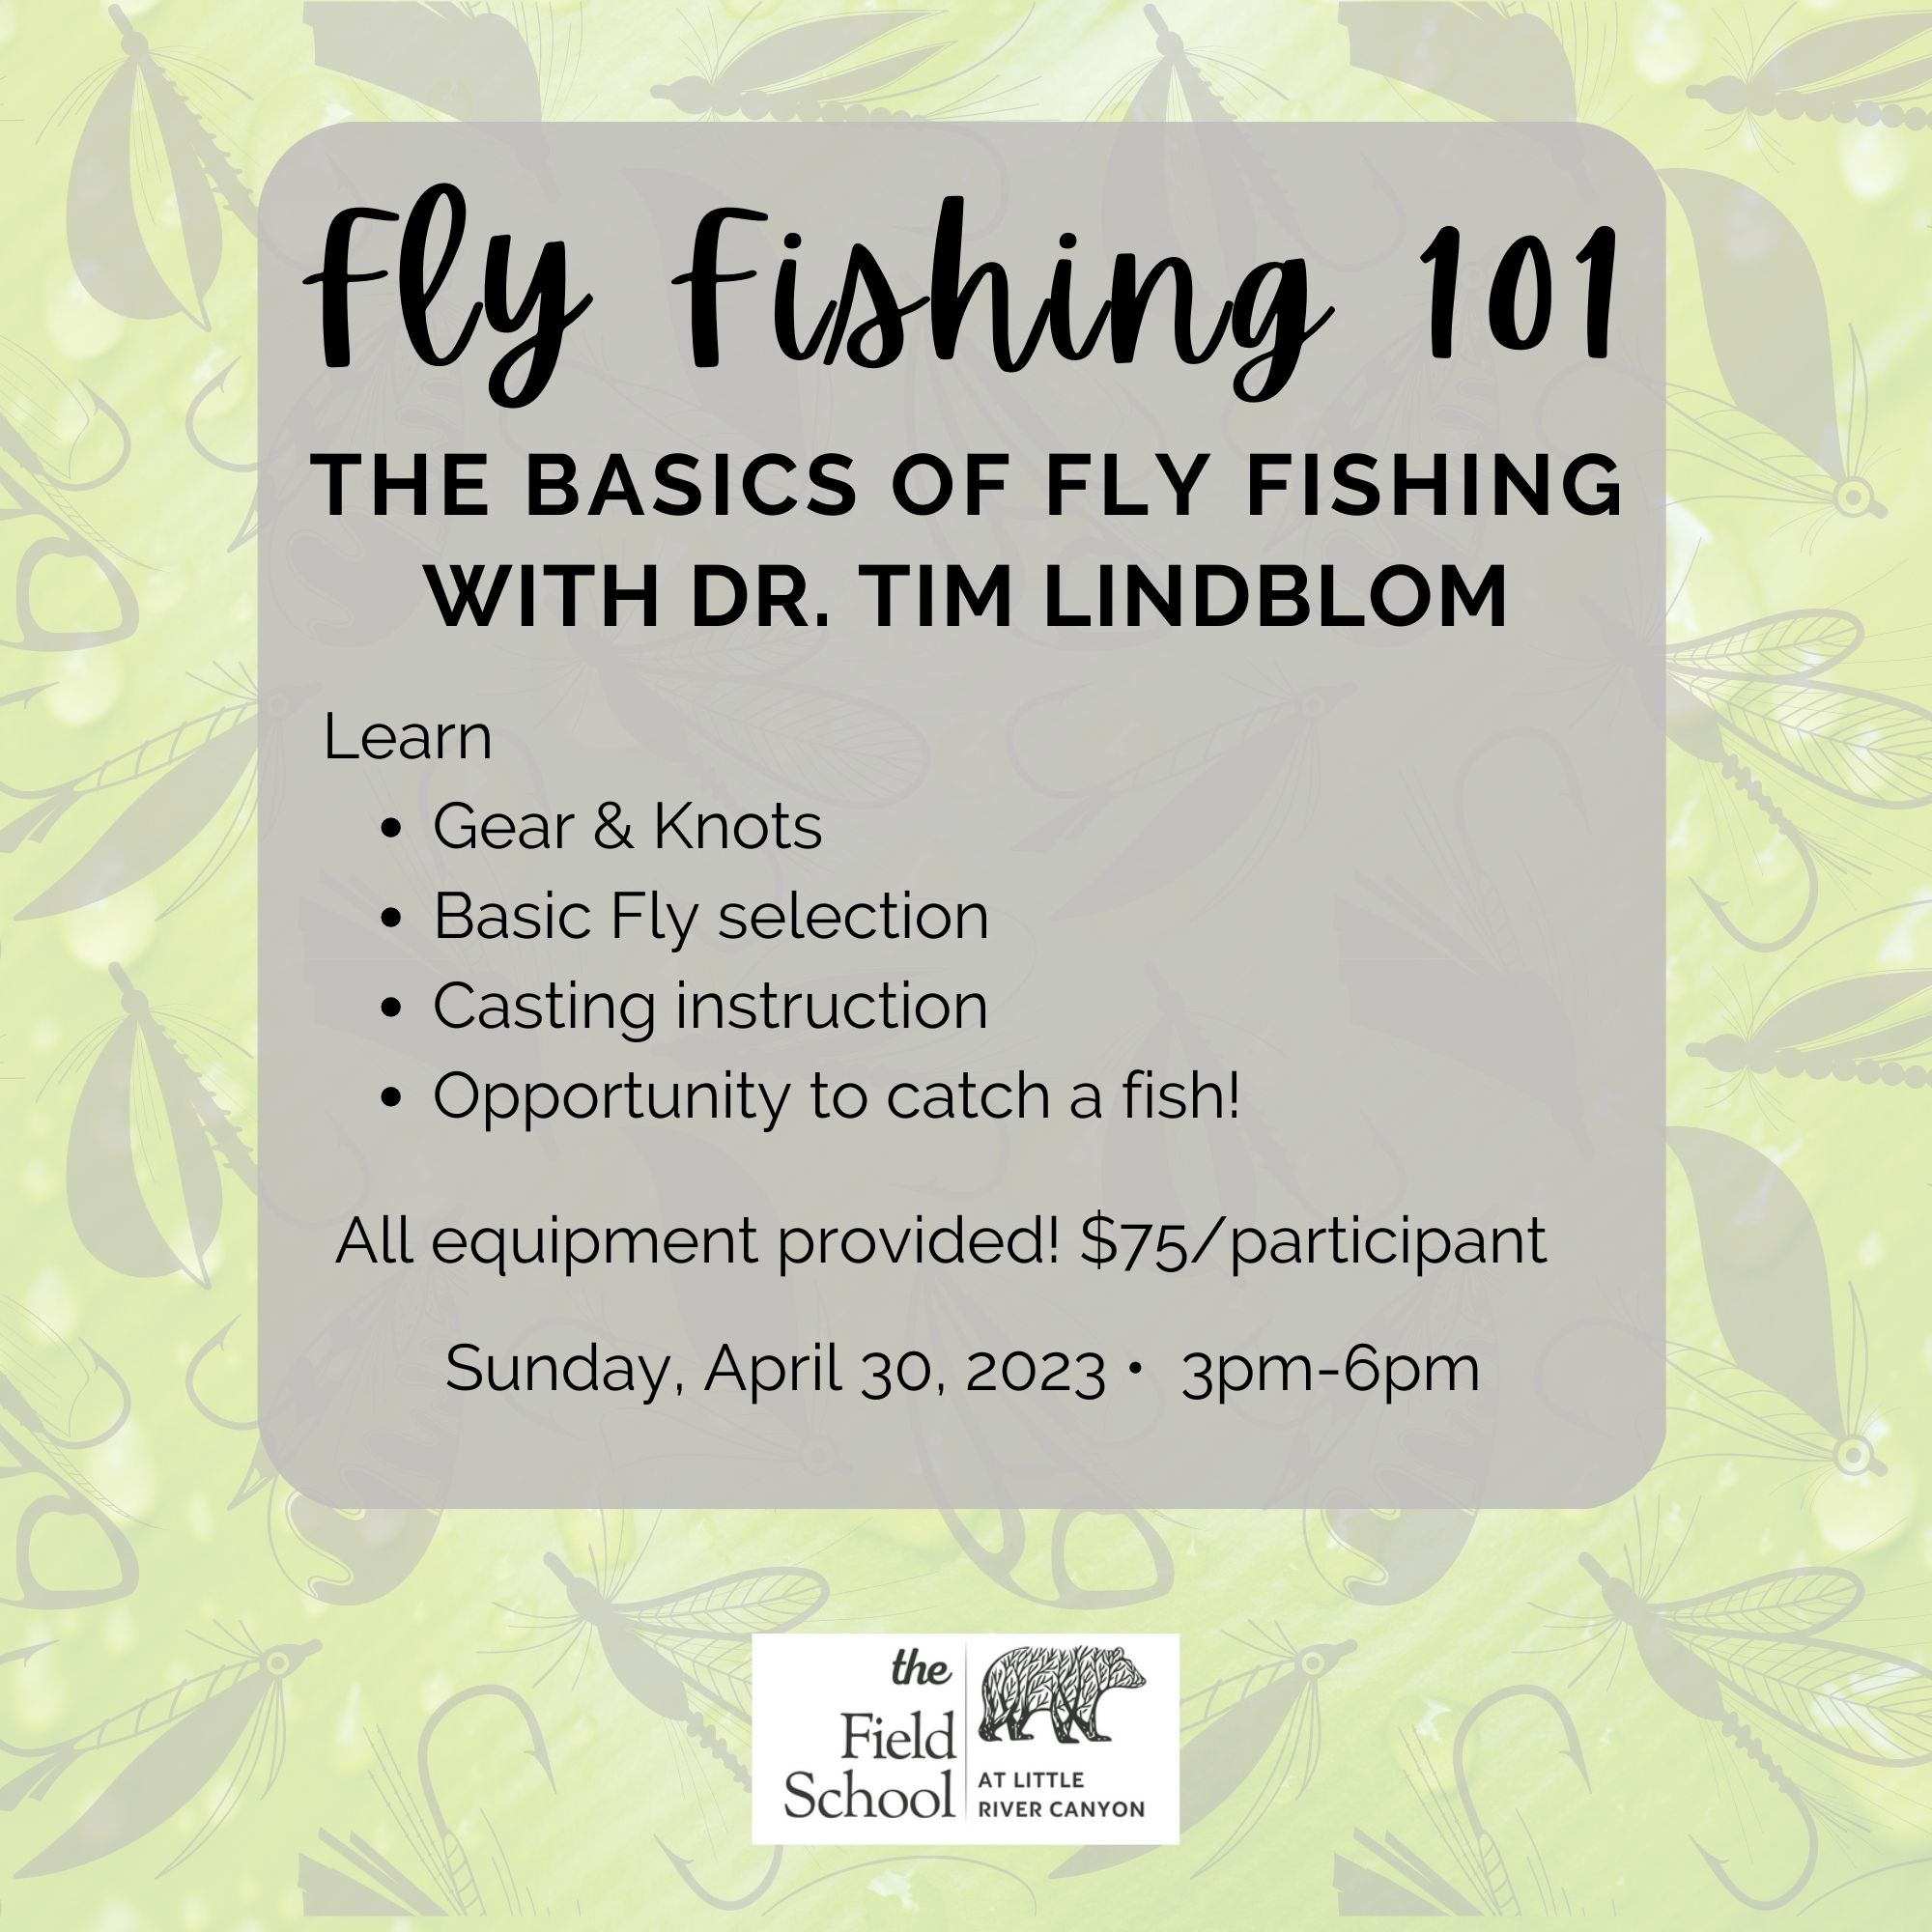 Free Fly Fishing 101 Classes